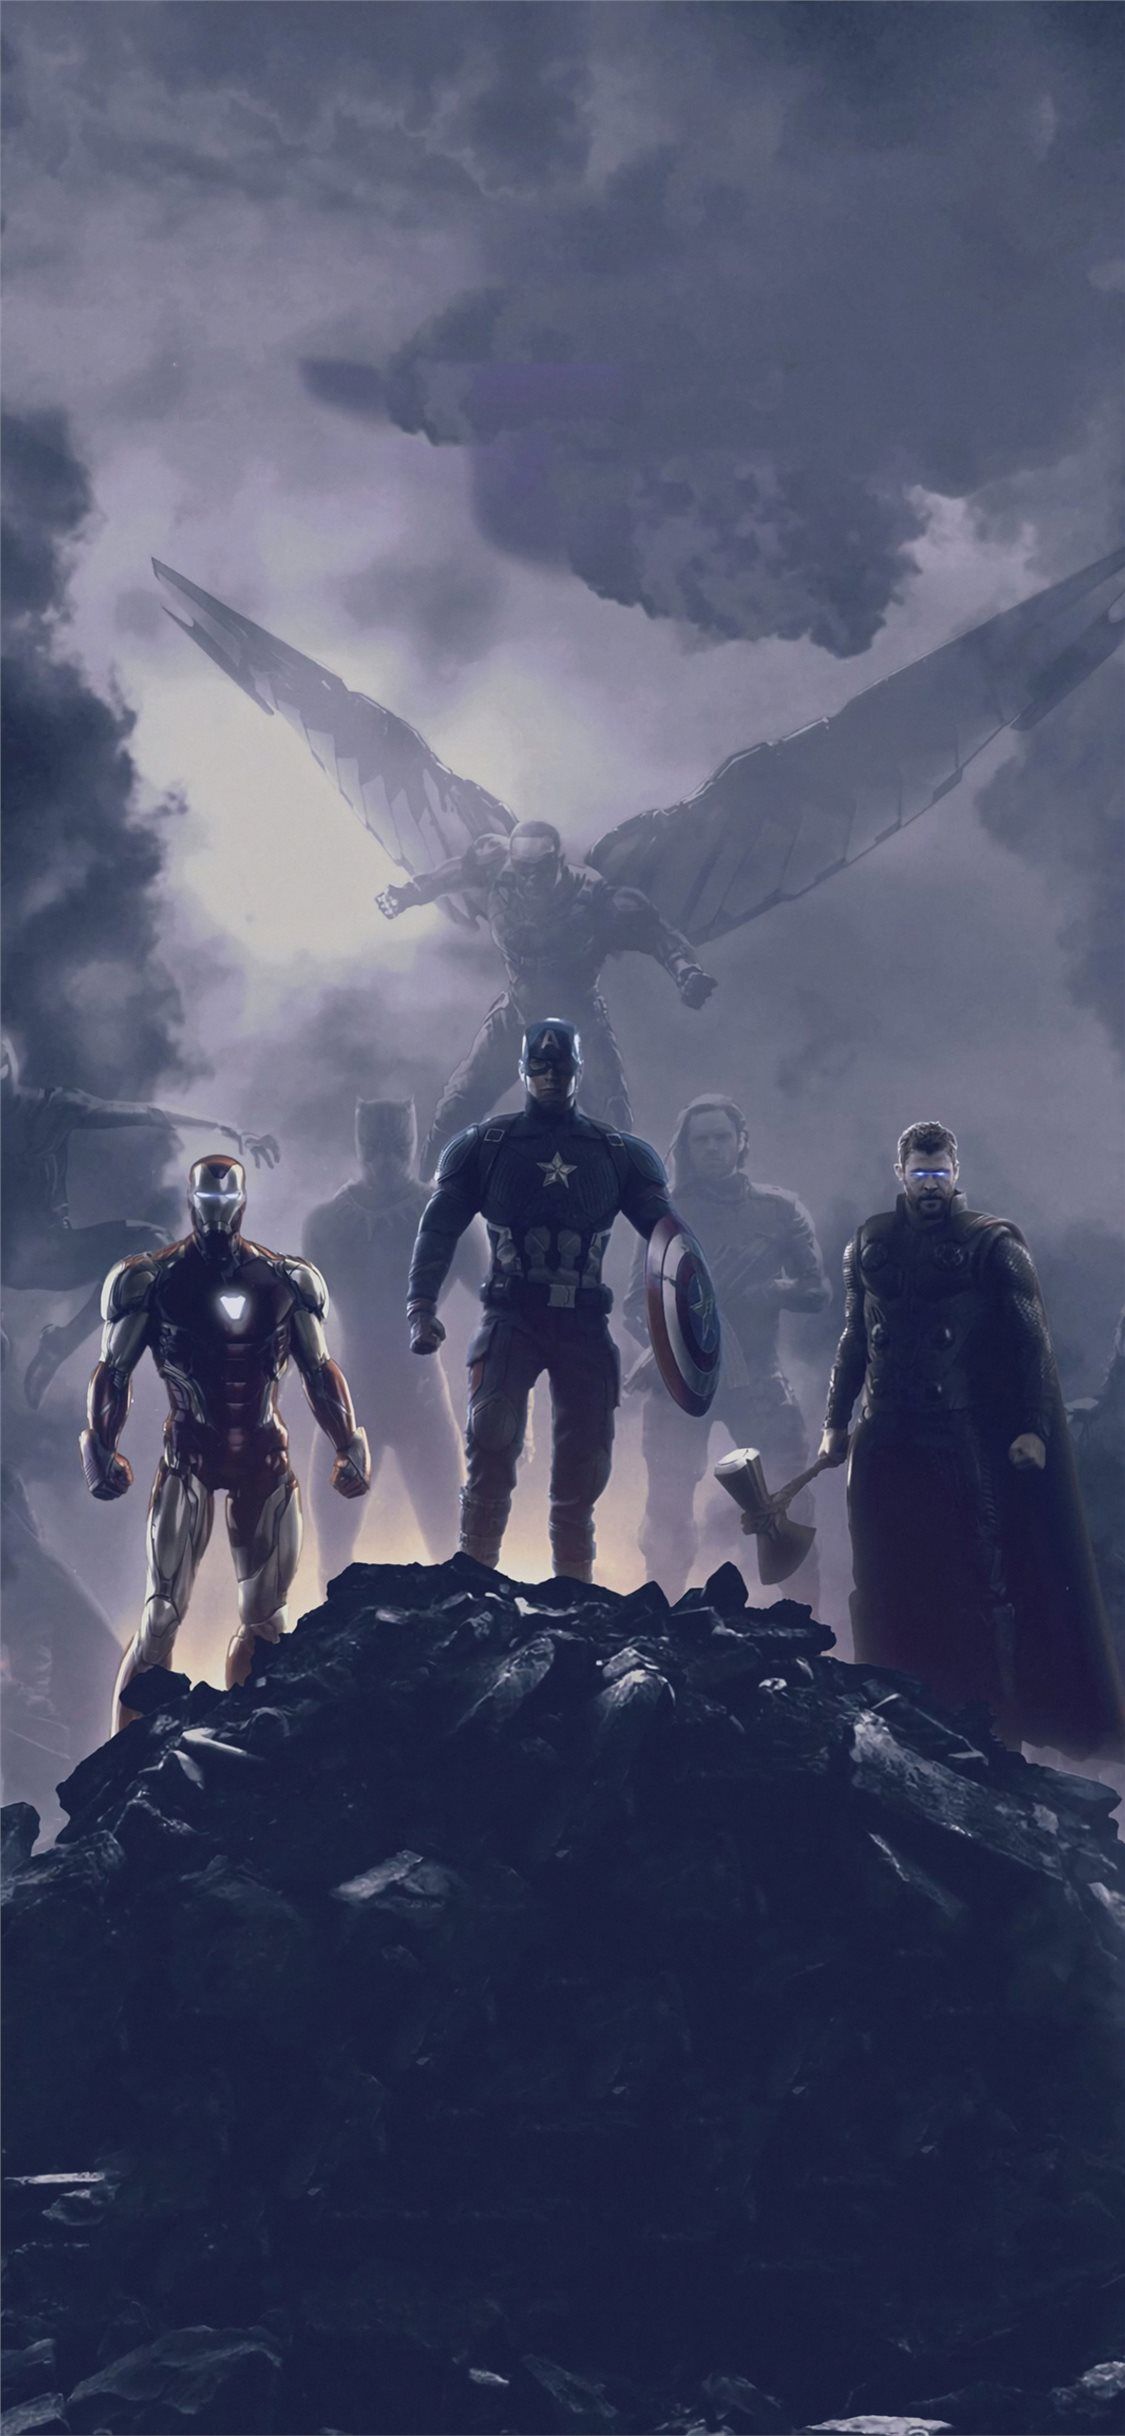 AVENGERS ENDGAME. articles and image curated. avengers, marvel cinematic, marvel avengers